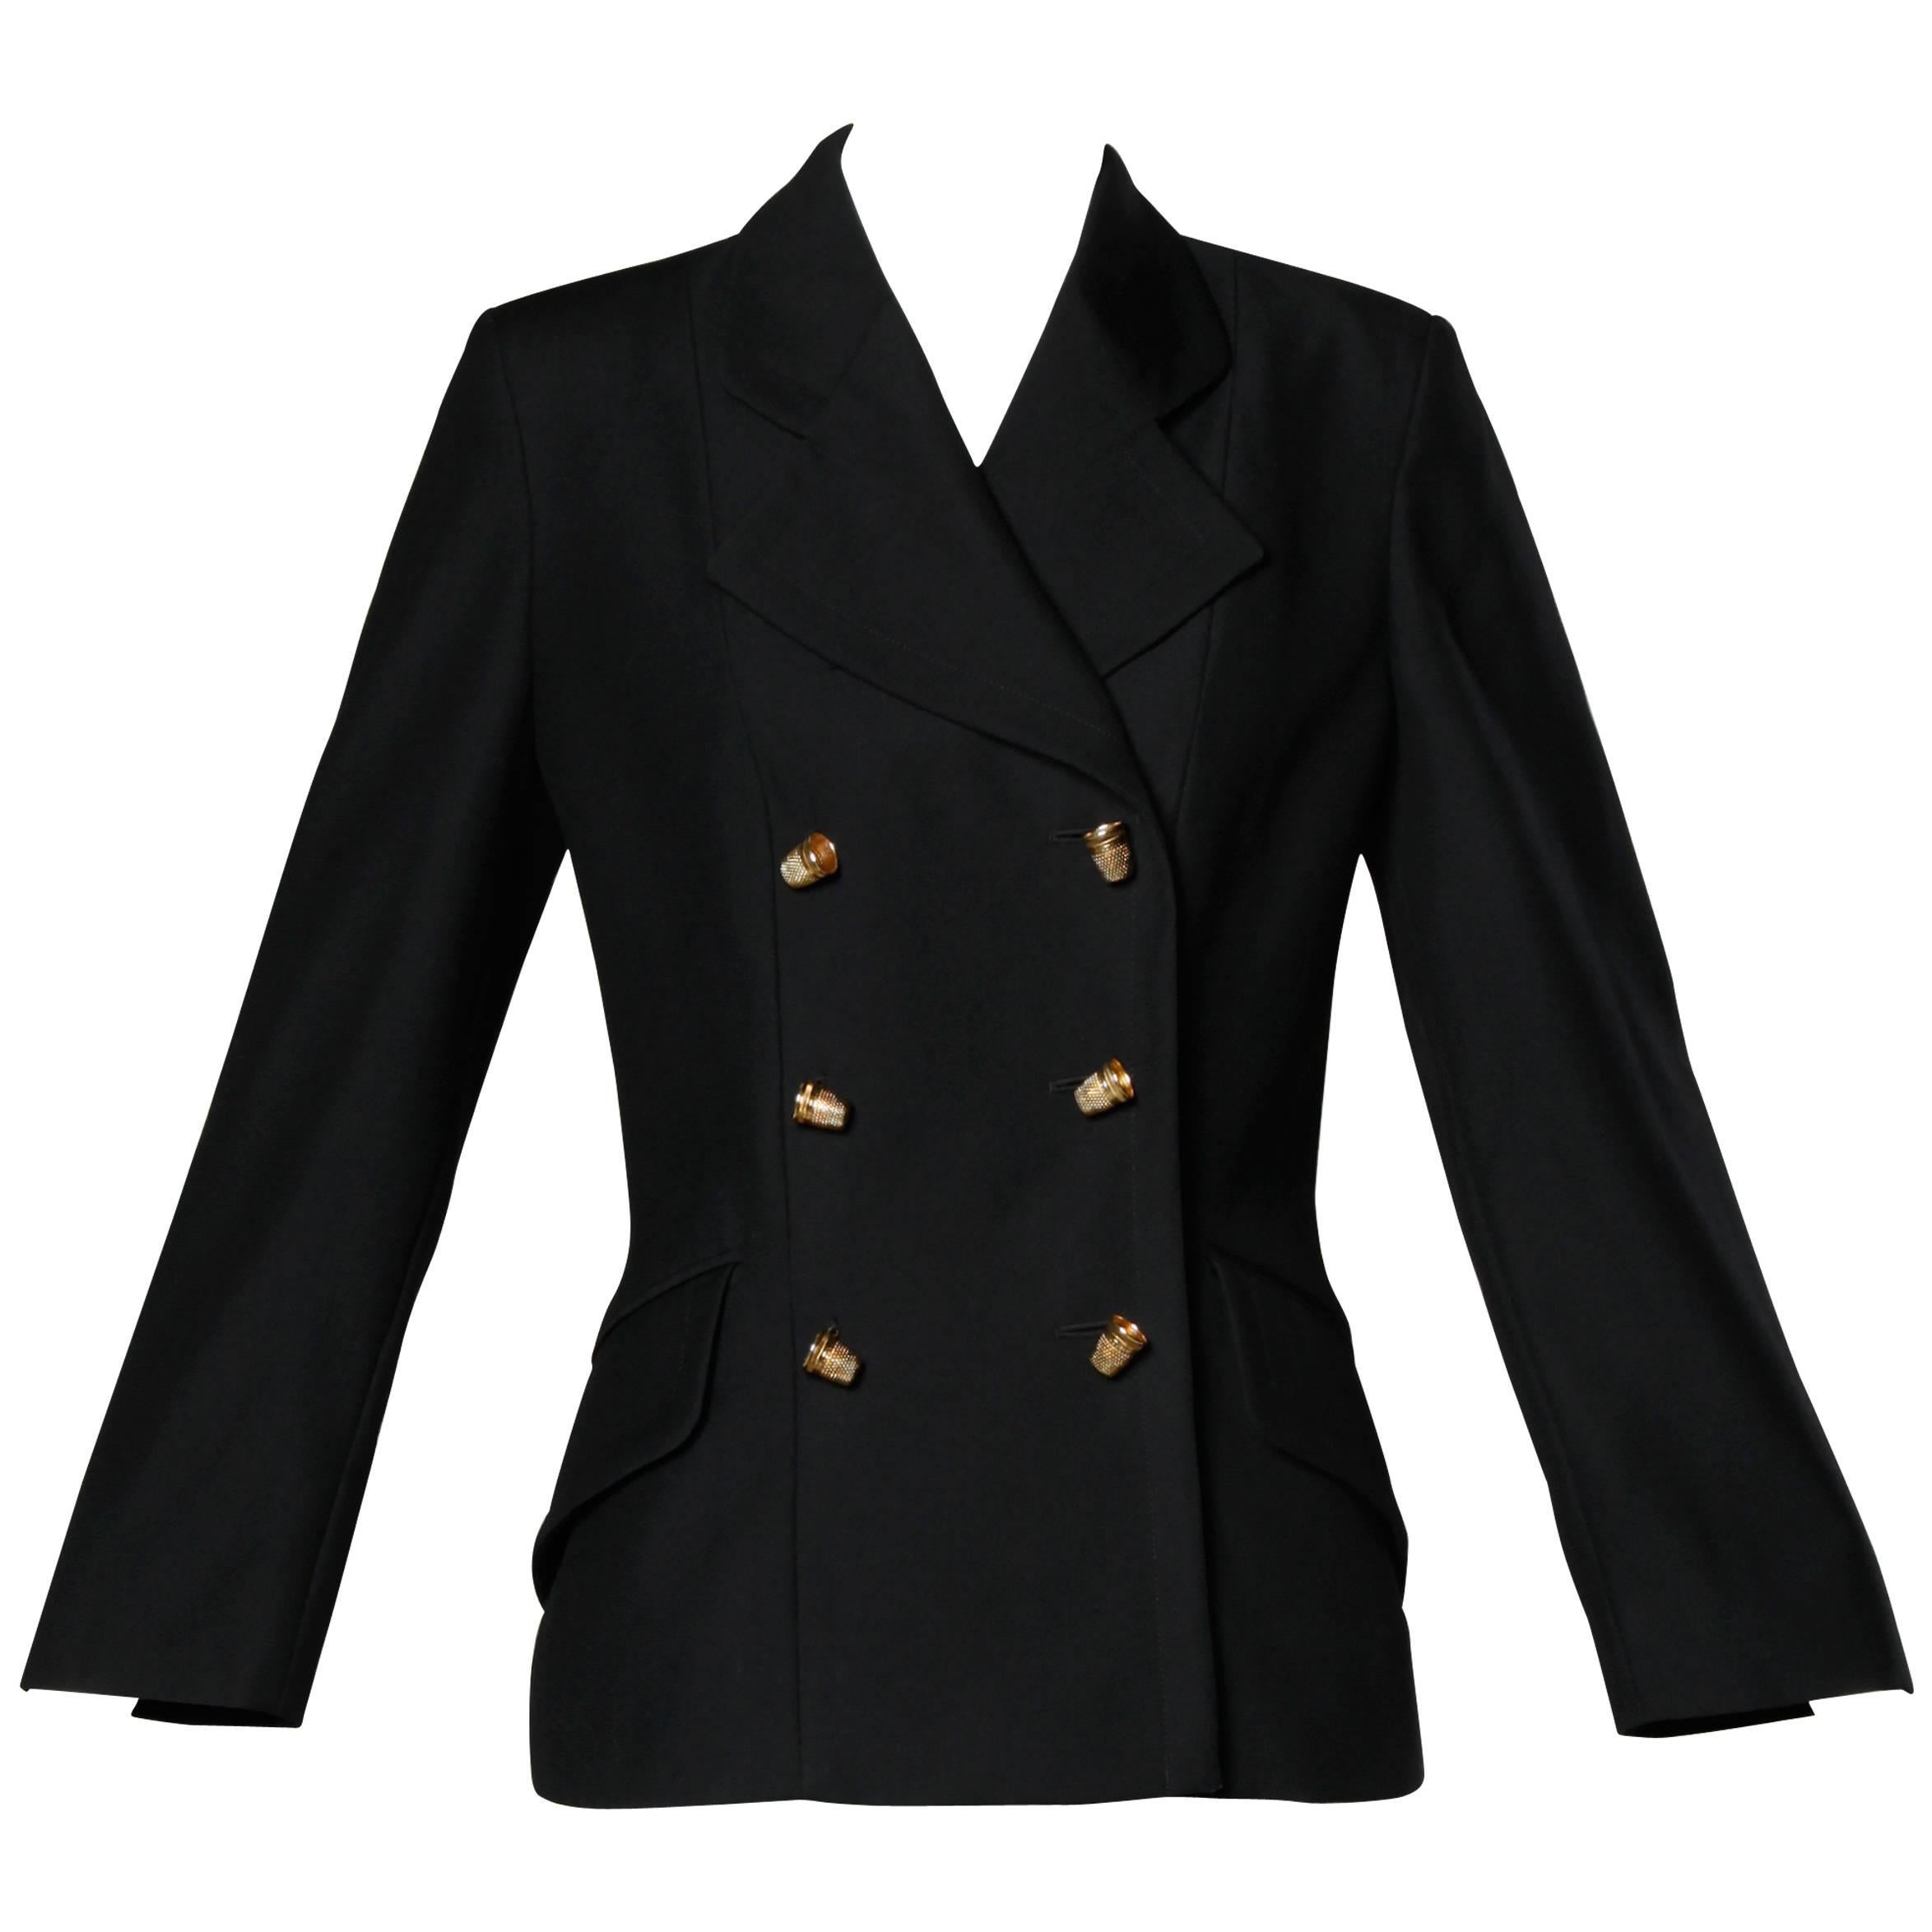 Moschino Vintage 90s Black Blazer Jacket with Novelty "Thimble" Buttons